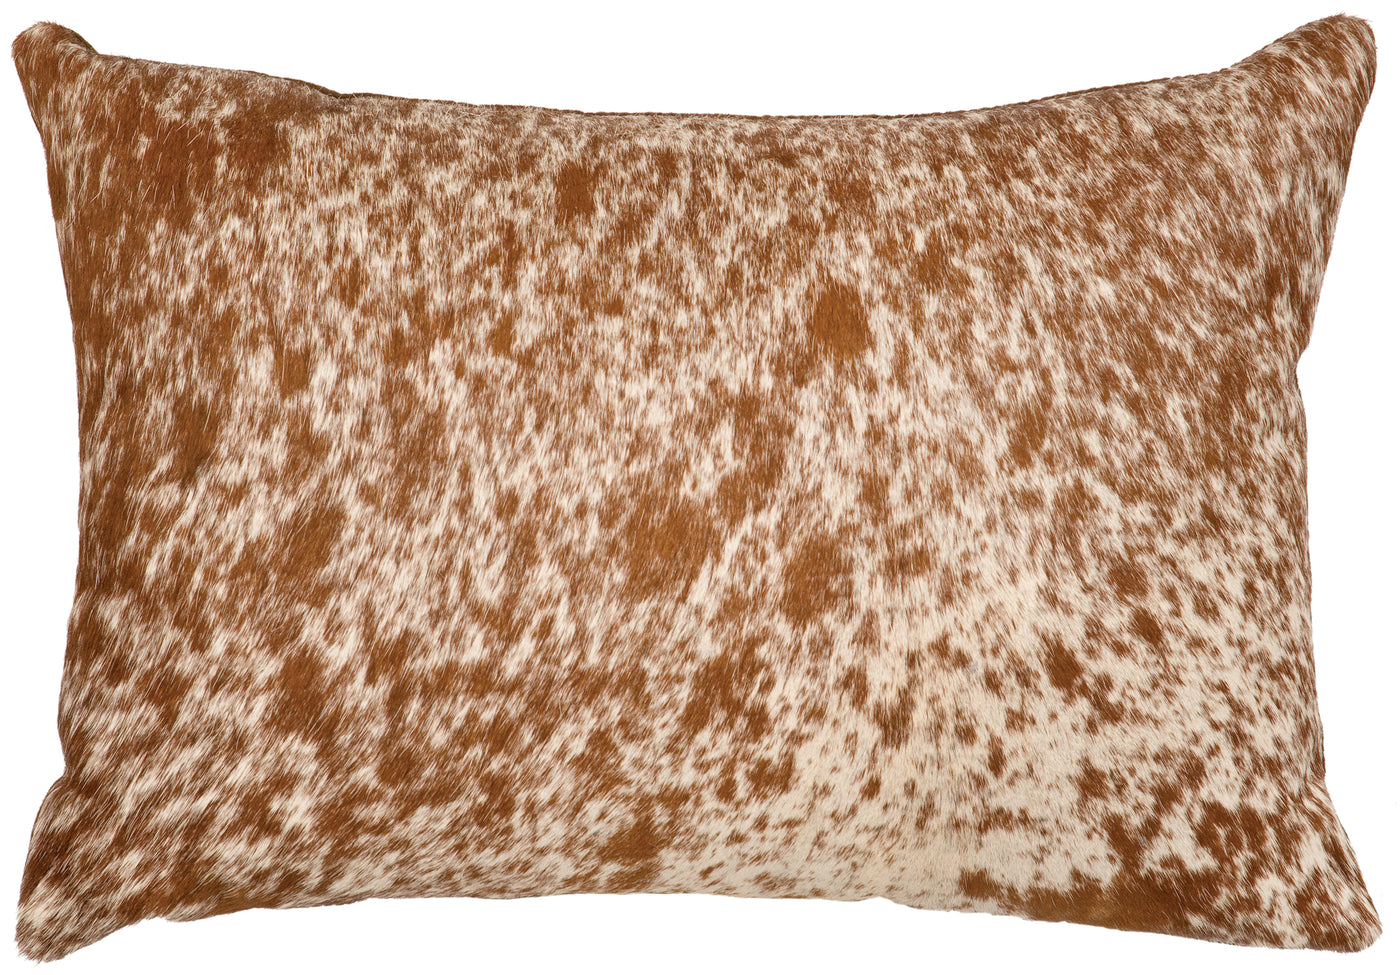 Canvello Speckled Light Brown Leather Pillow - Fabric Back - 16" x 16"